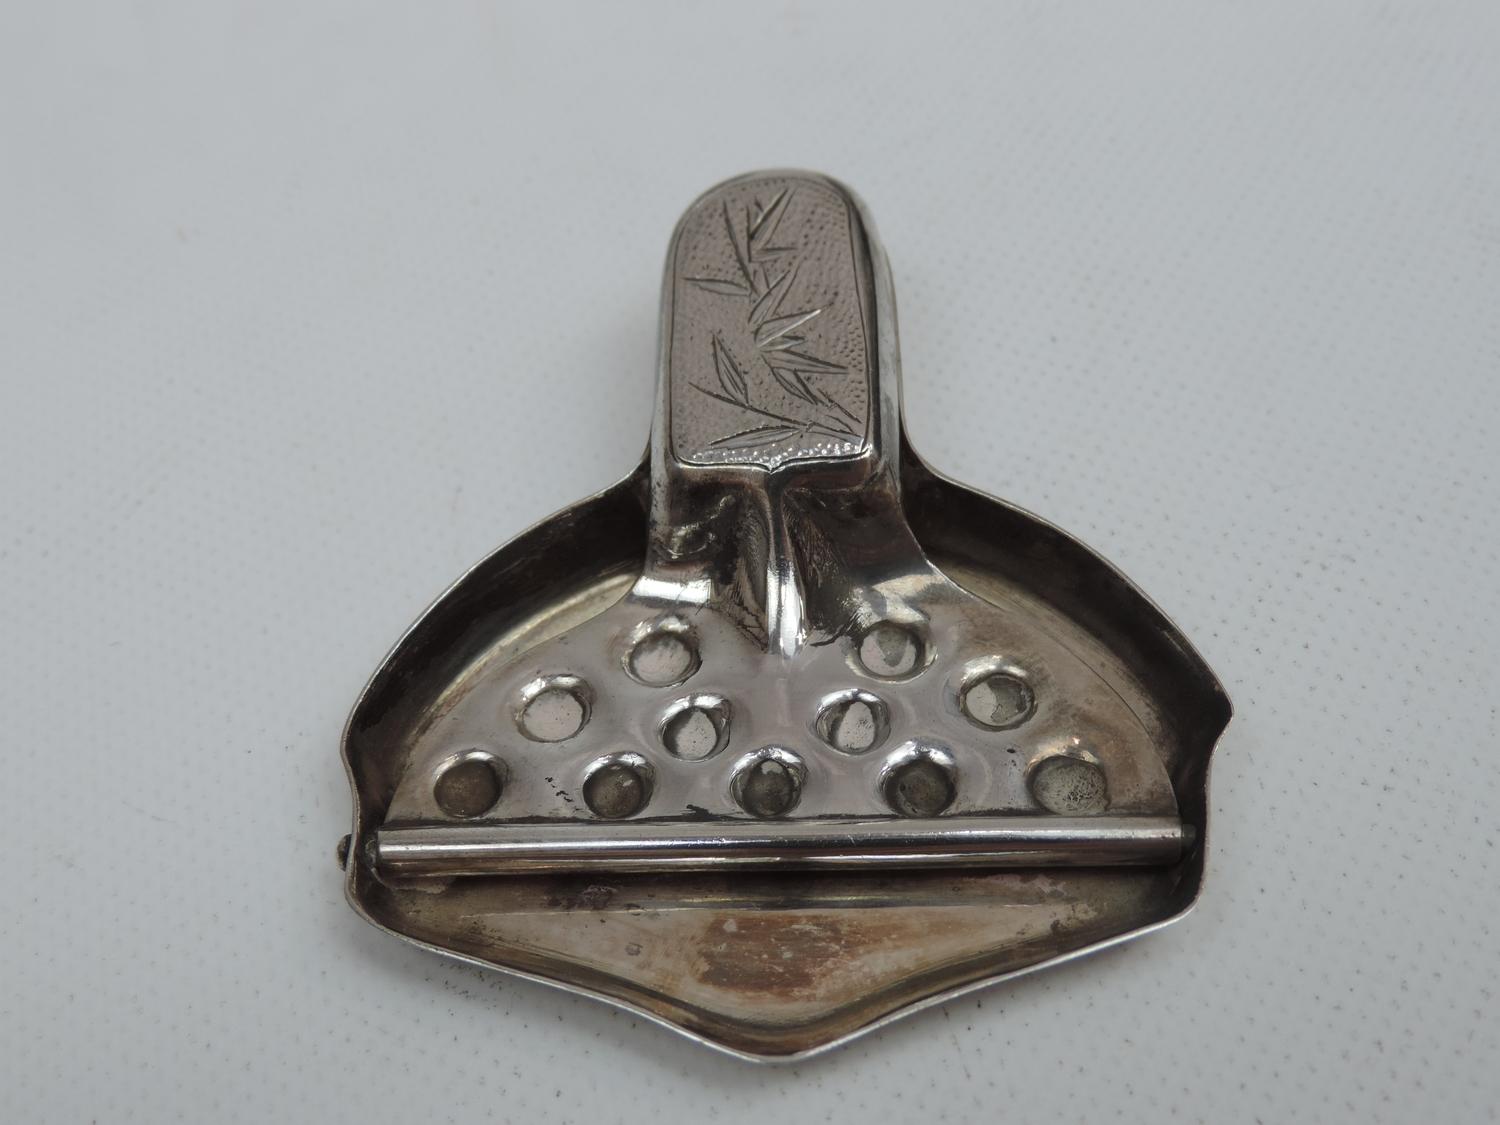 An Antique Chinese Lemon Squeezer with Foliate Motif to the Handle - Hallmarked 'Tacking Sterling